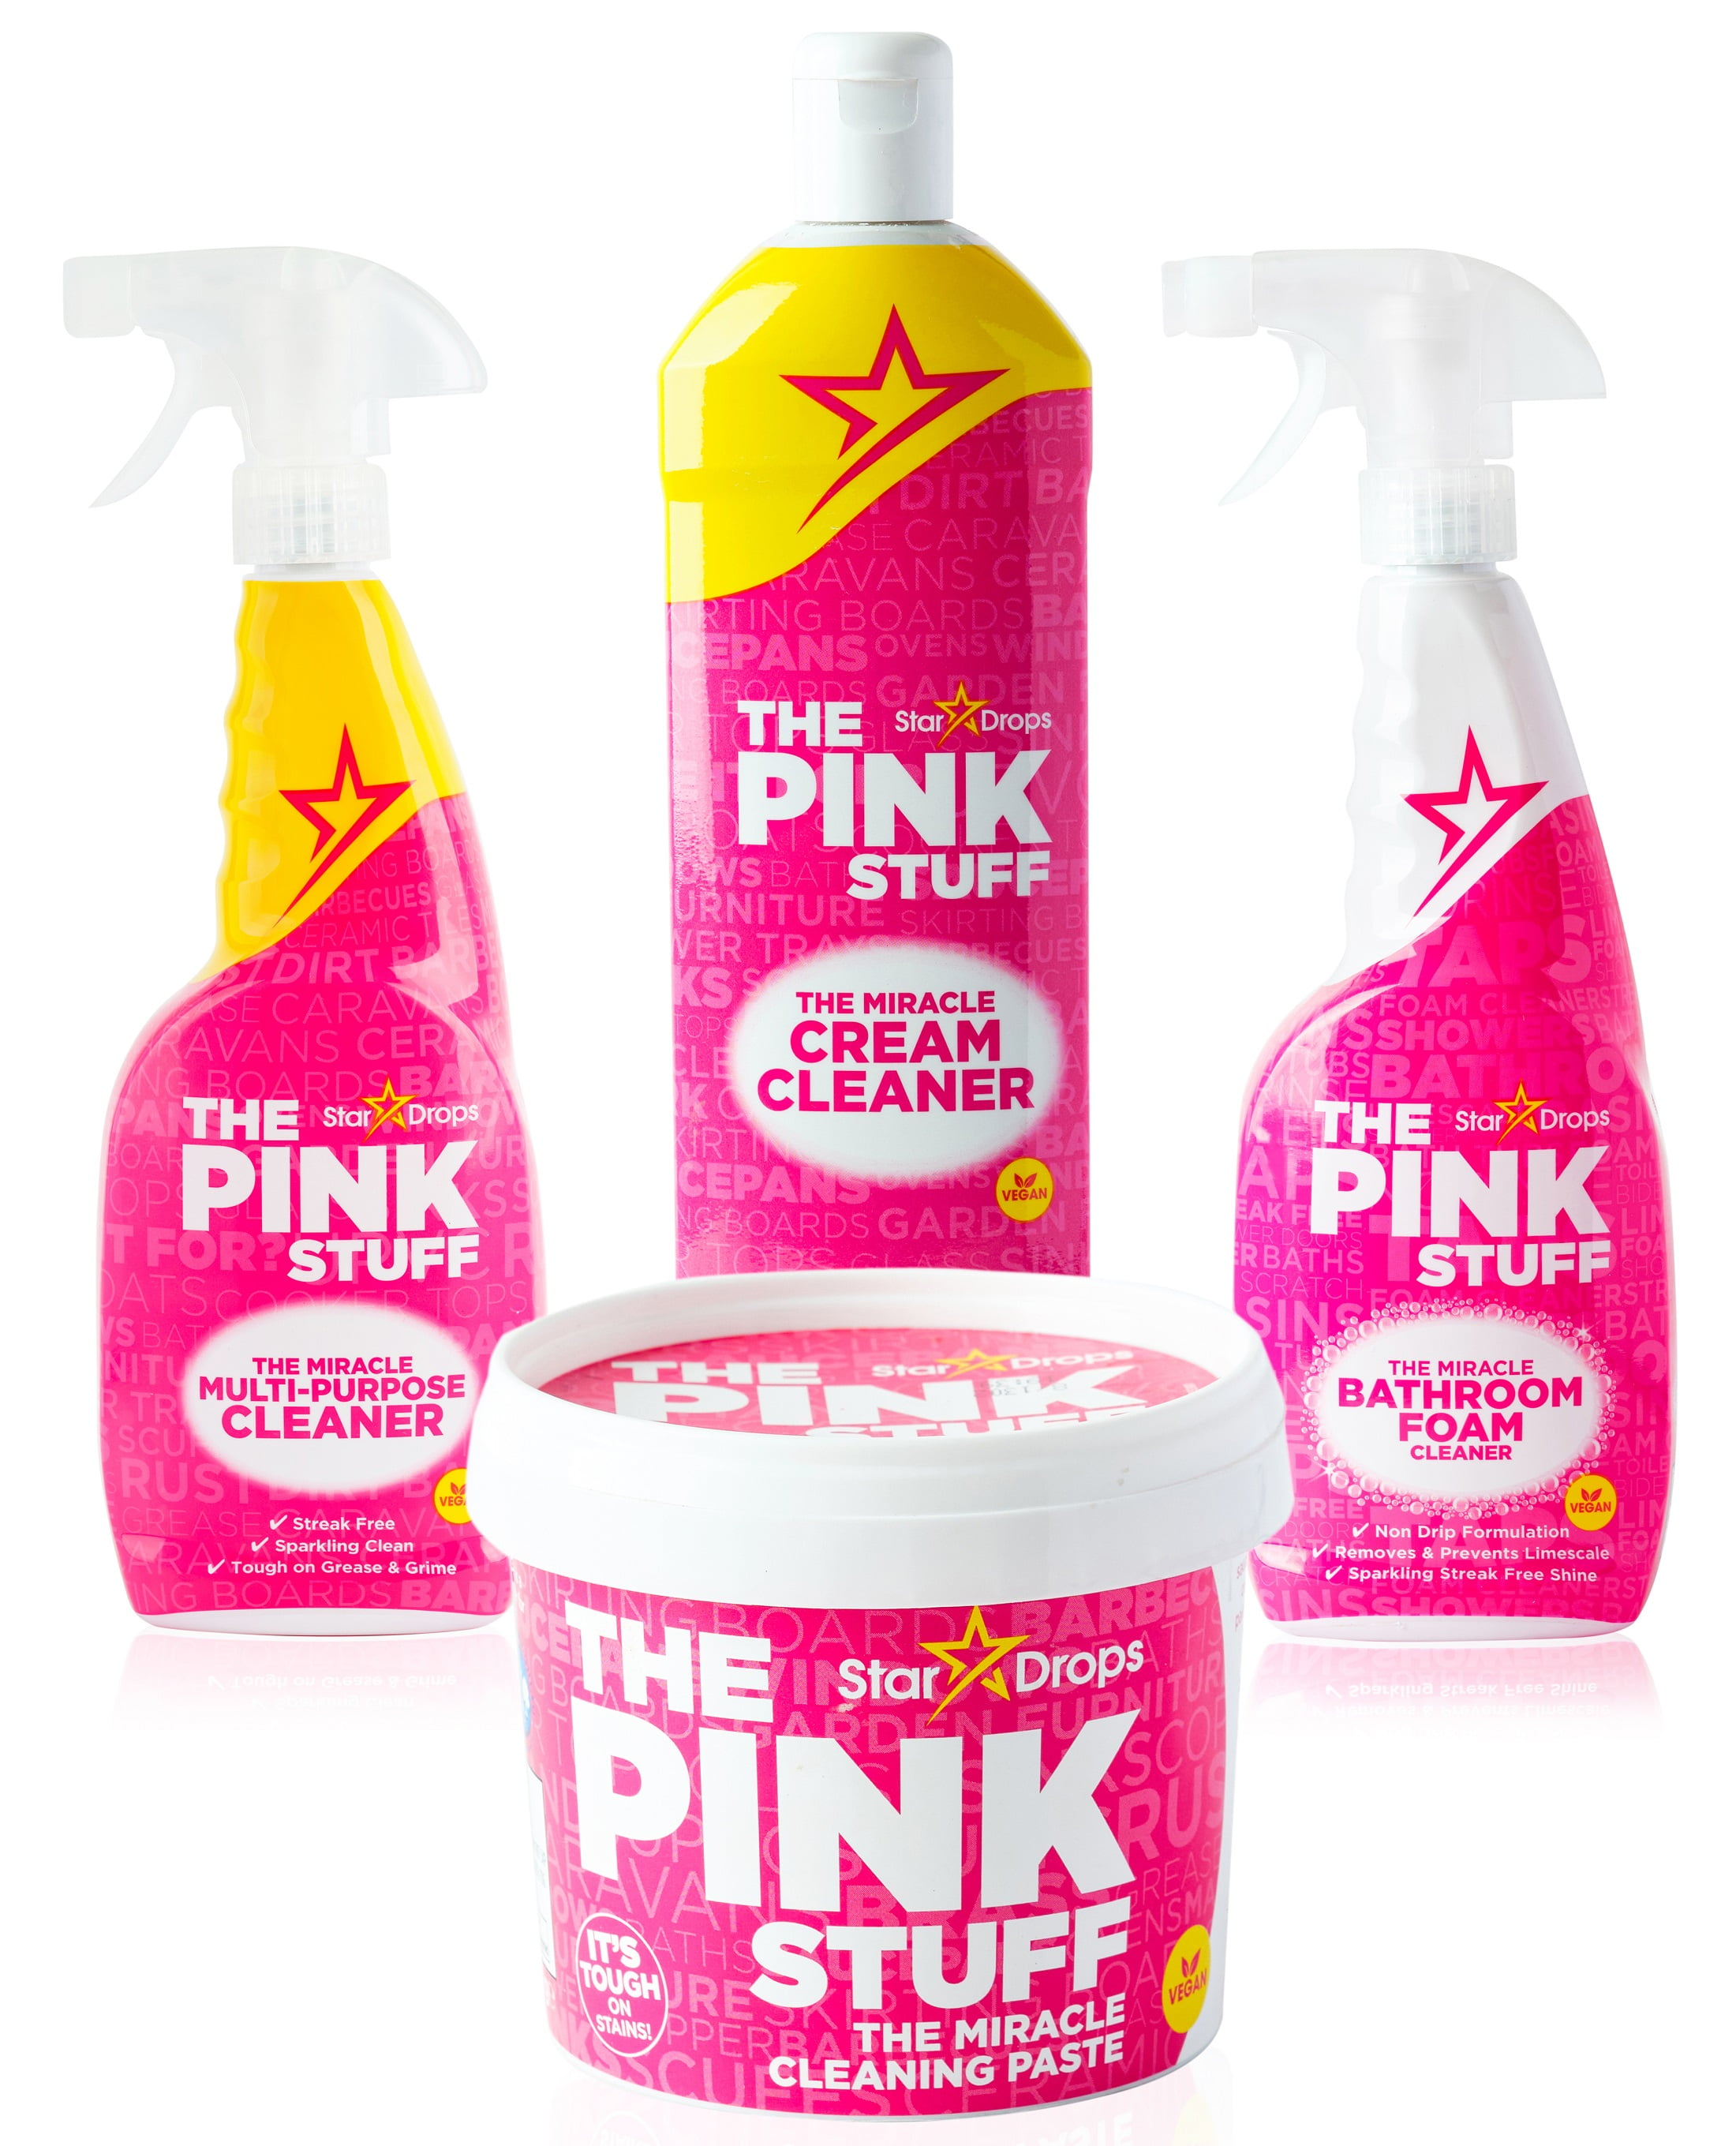 Stardrops - The Pink Stuff - Ultimate Bundle - The Miracle Cleaning Paste, Multi-Purpose Spray, Cream Cleaner, Bathroom Spray (1 Cleaning Paste, 1